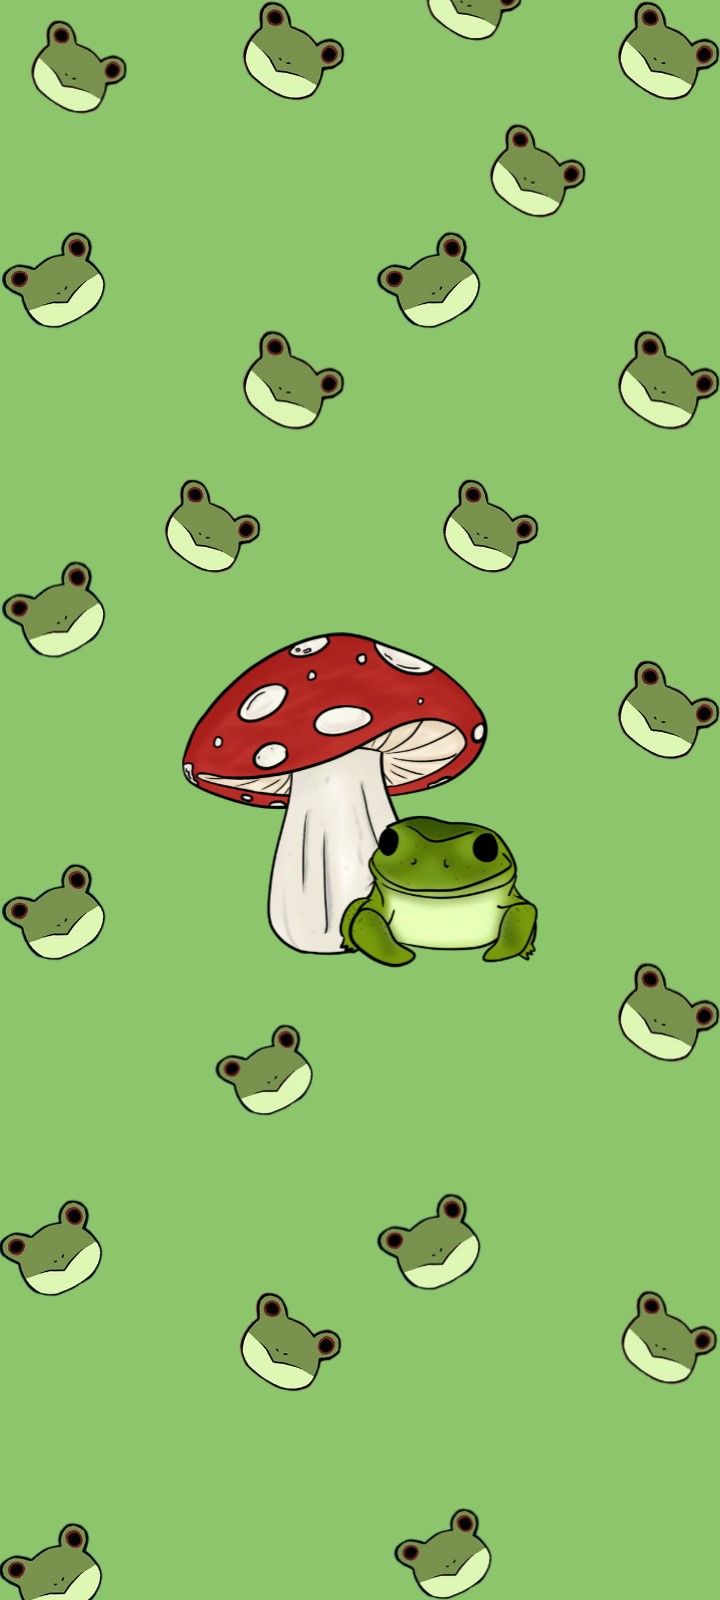 Frog vibes ideas. cute frogs, frog art, frog wallpaper